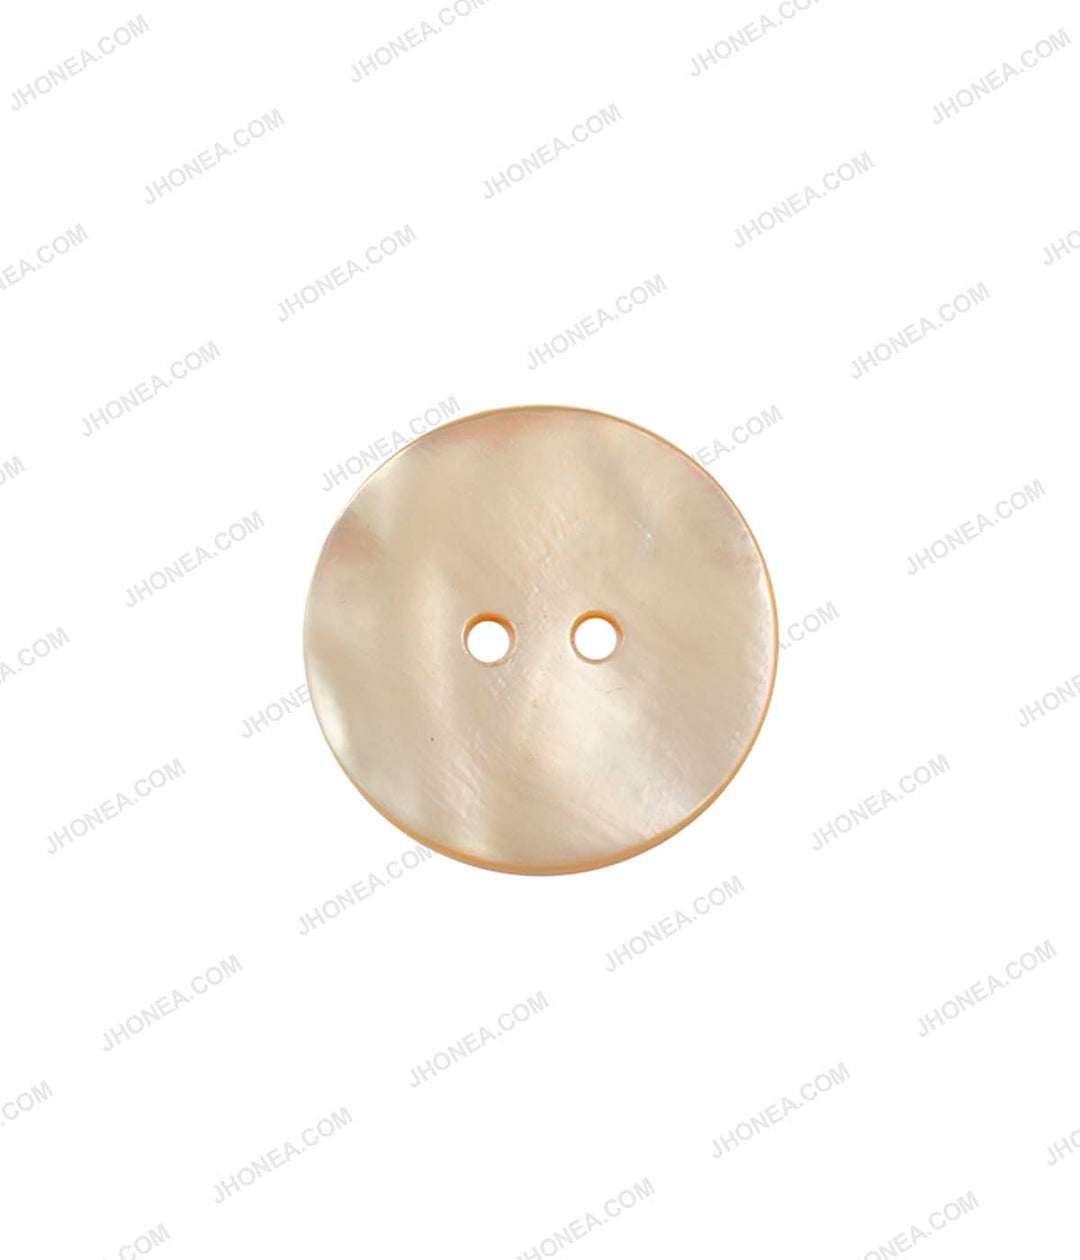 Glossy & Shiny Pearlescent White Shirt Buttons for Shirts/Blazers in Natural Color